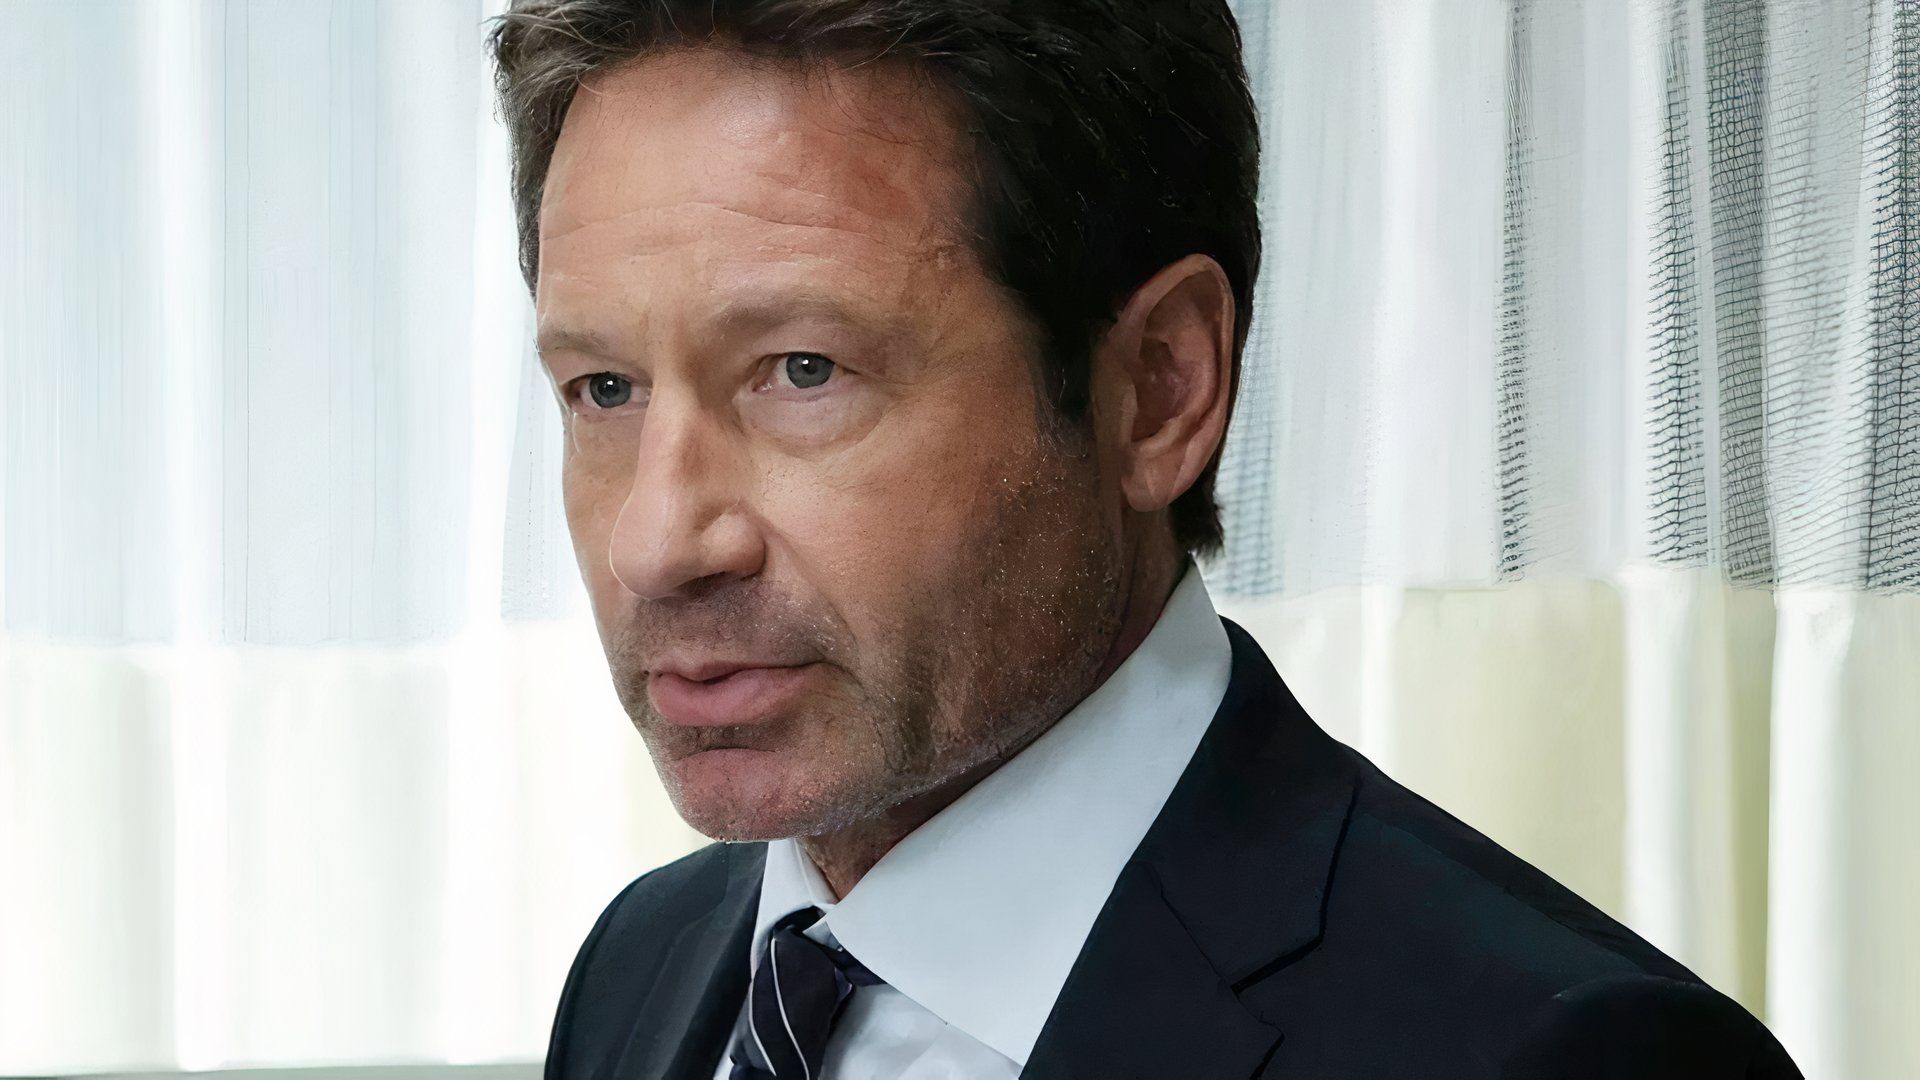 Agent Fox Mulder in the tv show The X-Files